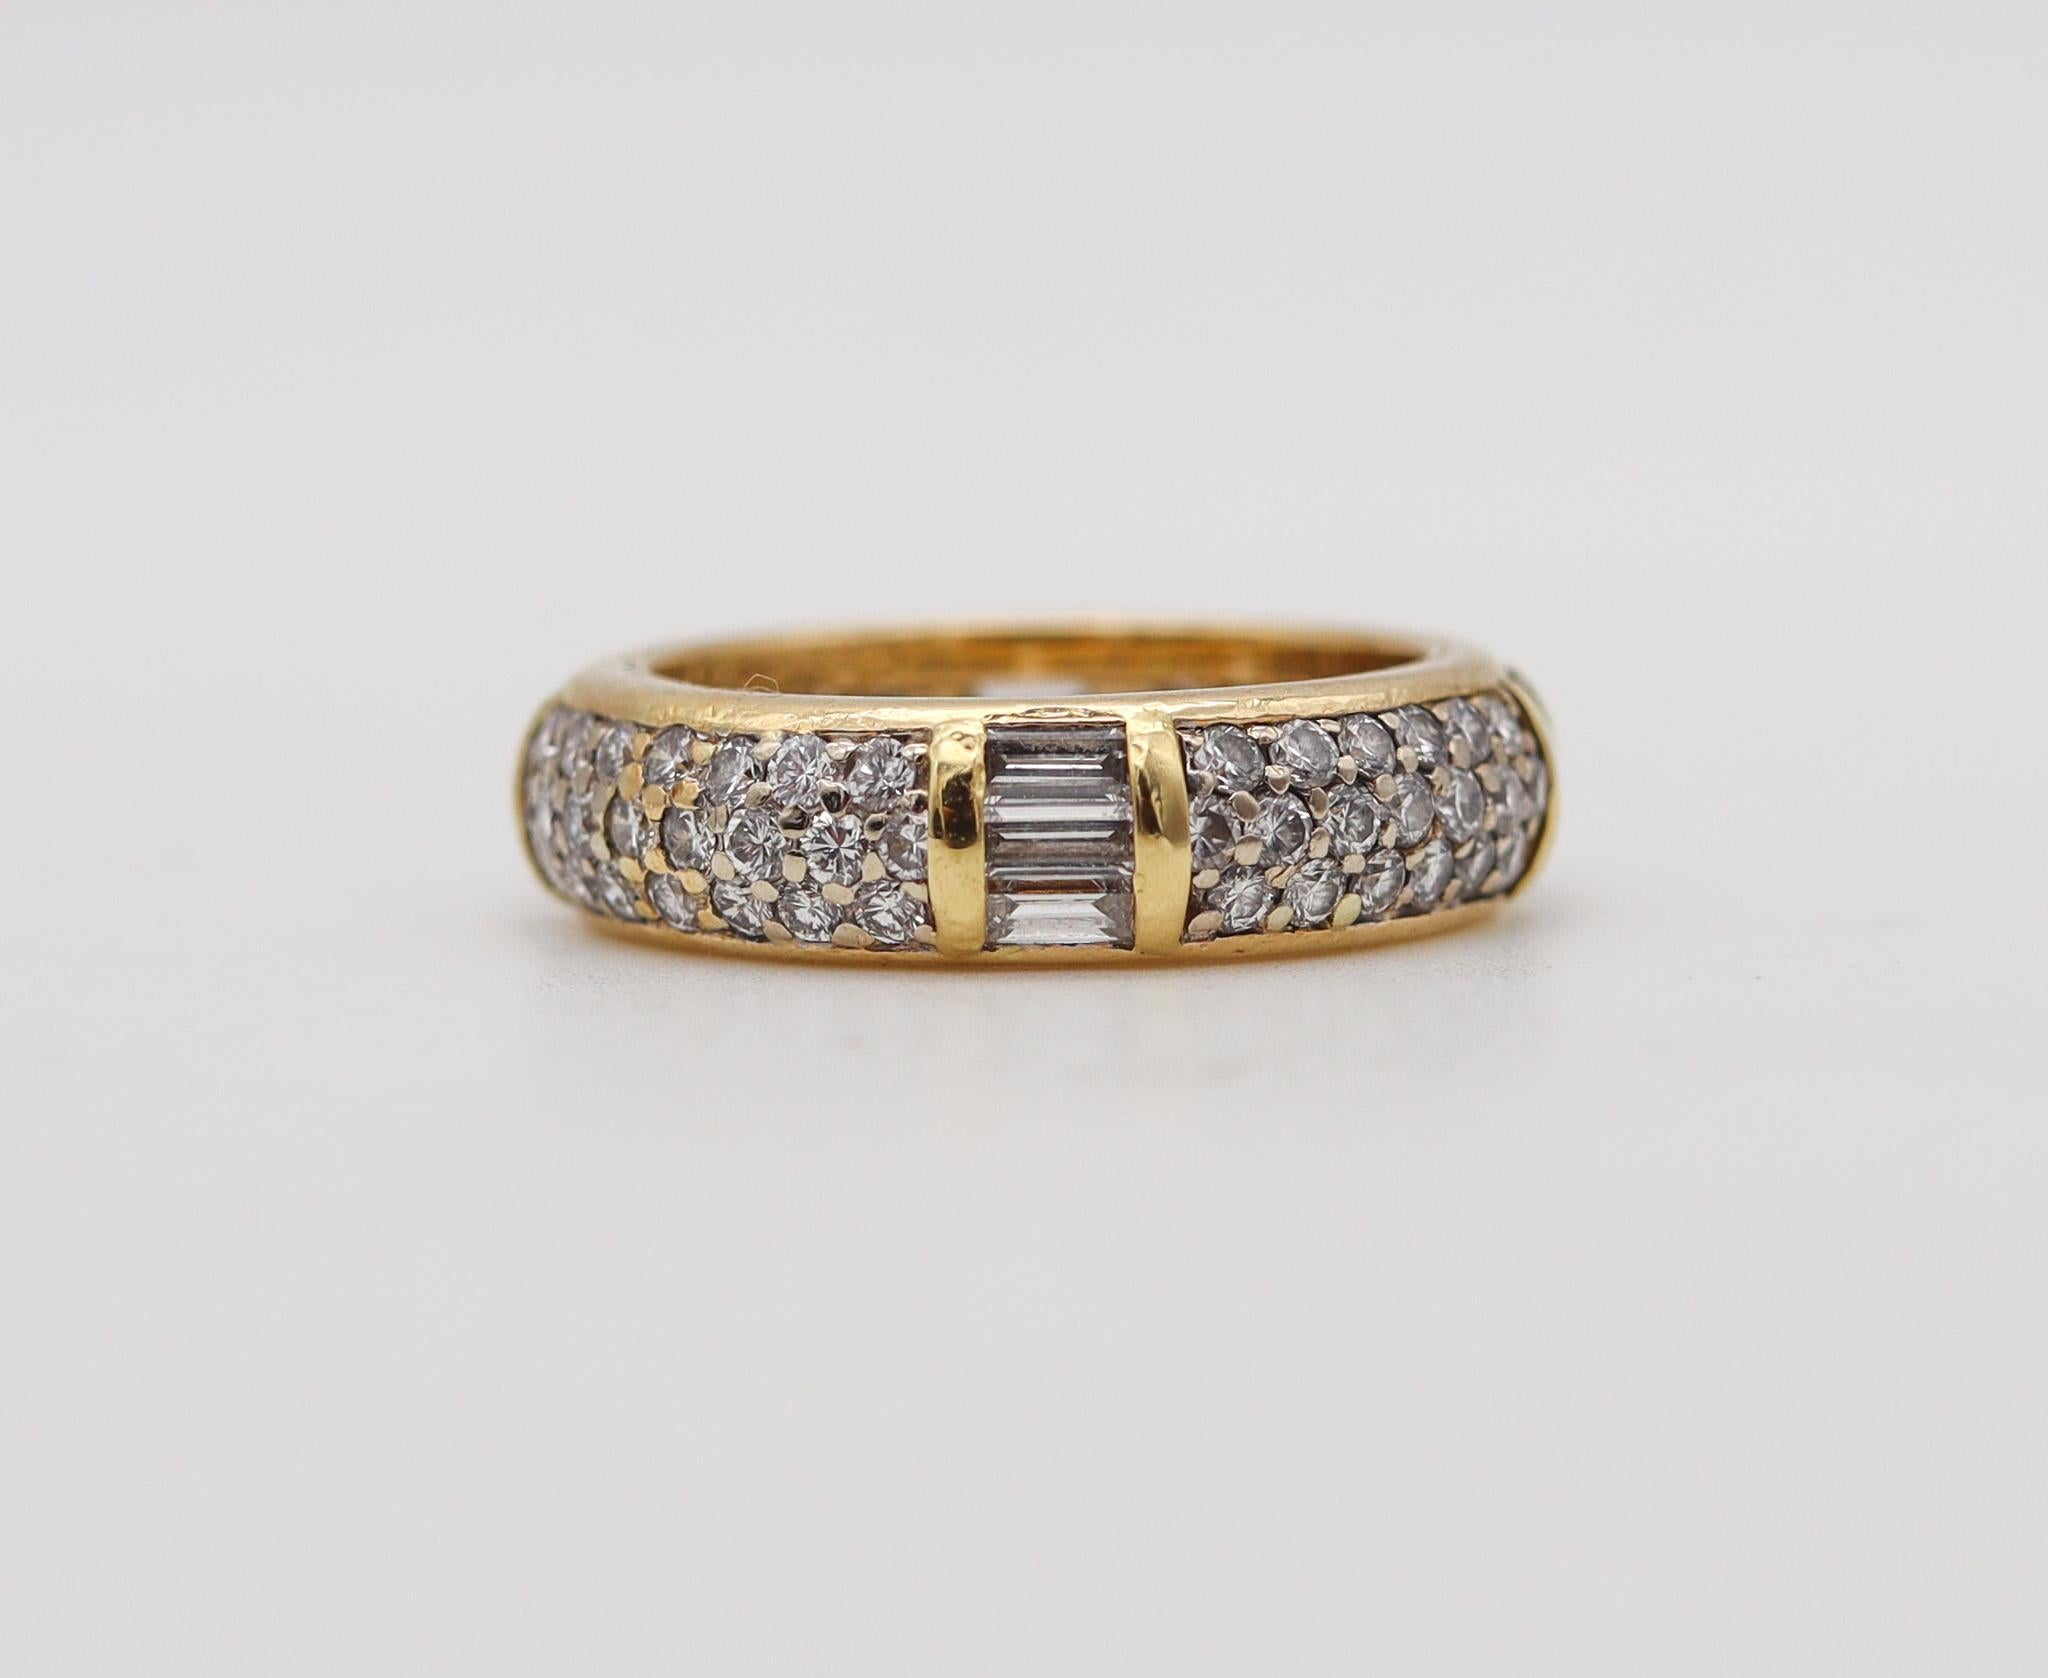 An unusual eternity ring designed by Cartier.

Very rare and unusual eternity ring, created in Paris France by the jewelry house of Cartier, back in the 1980. This ring has been crafted with a bold look, with four stations in solid yellow gold of 18